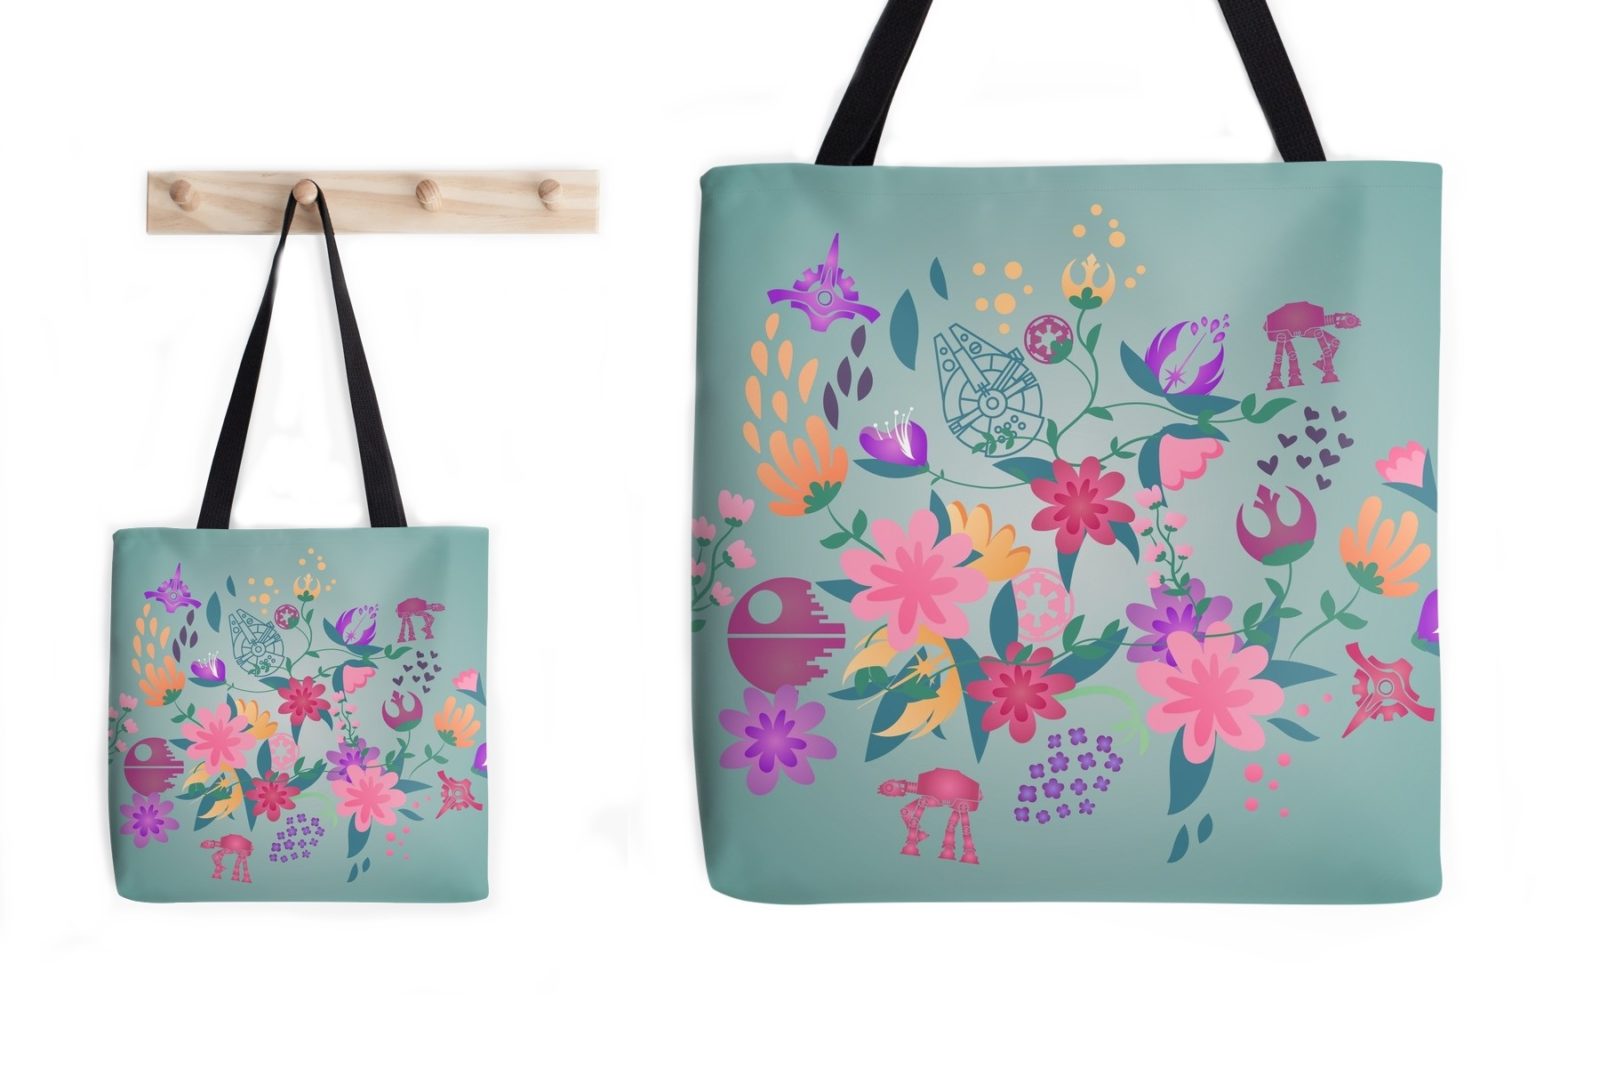 Star Wars Floral Print Tote Bag by Fashions For Fans on RedBubble